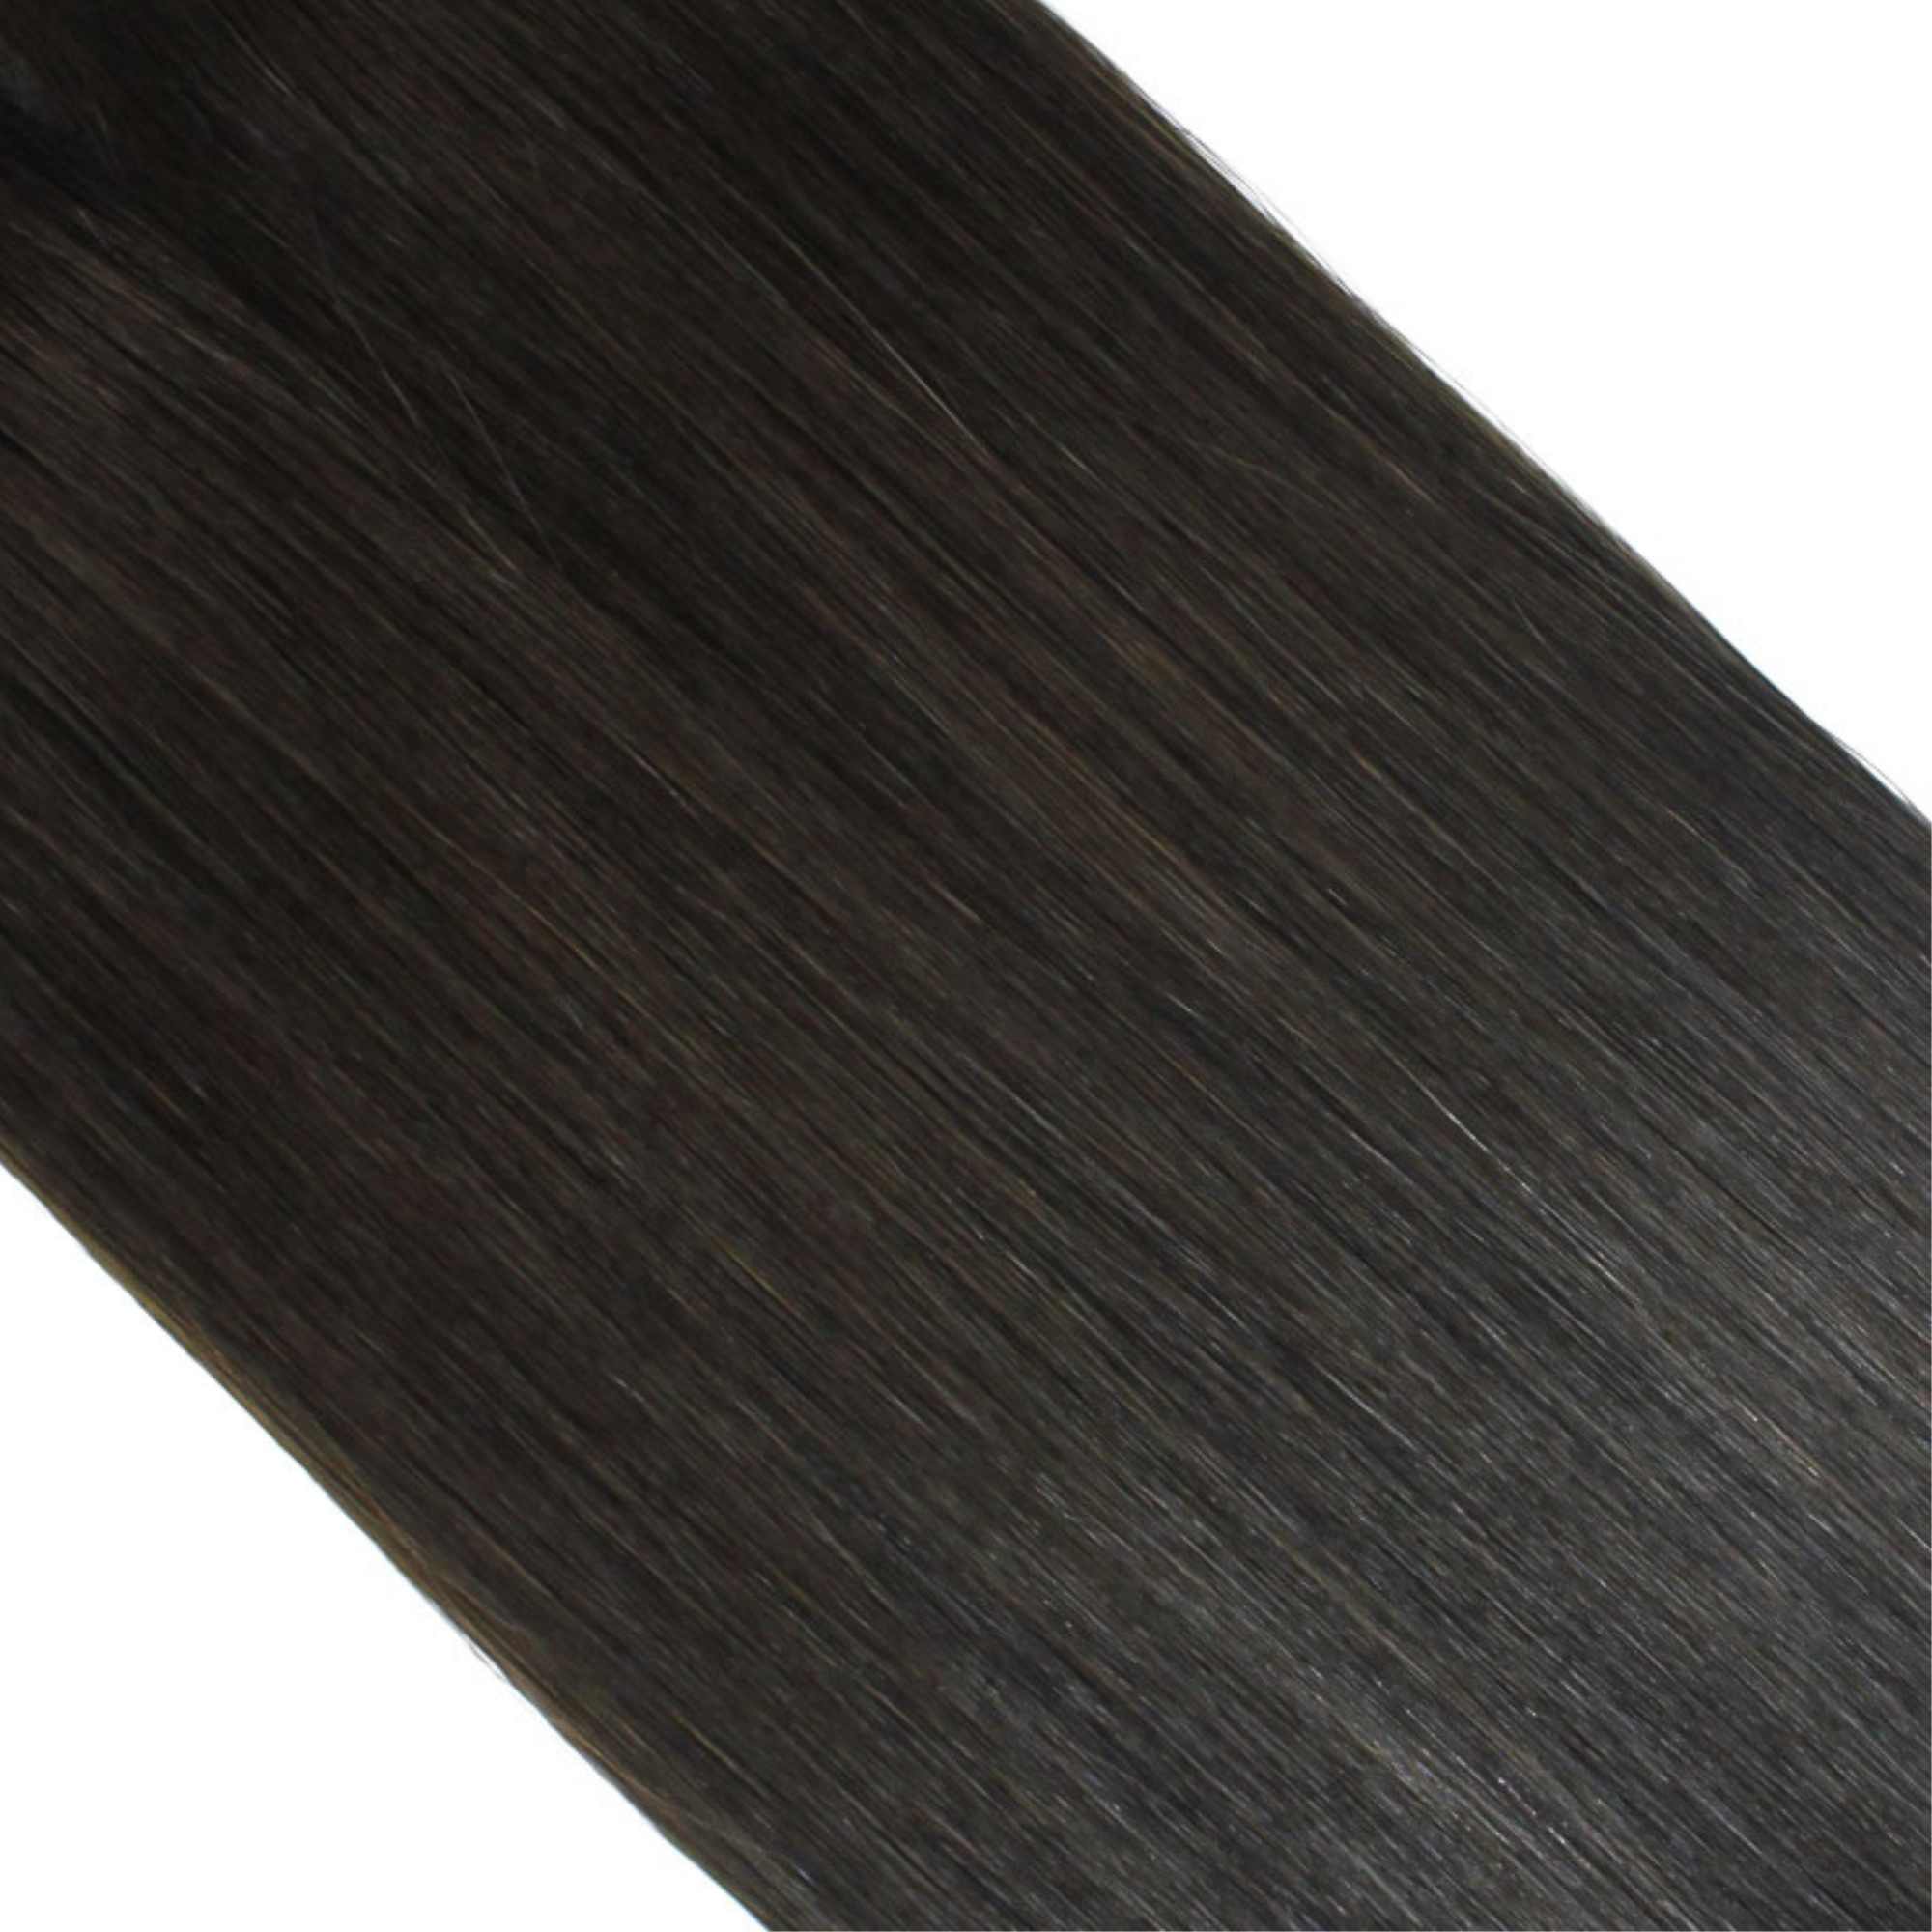 "hair rehab london 24" length 280 grams weight ultimate clip-in hair extensions shade titled show stopper"